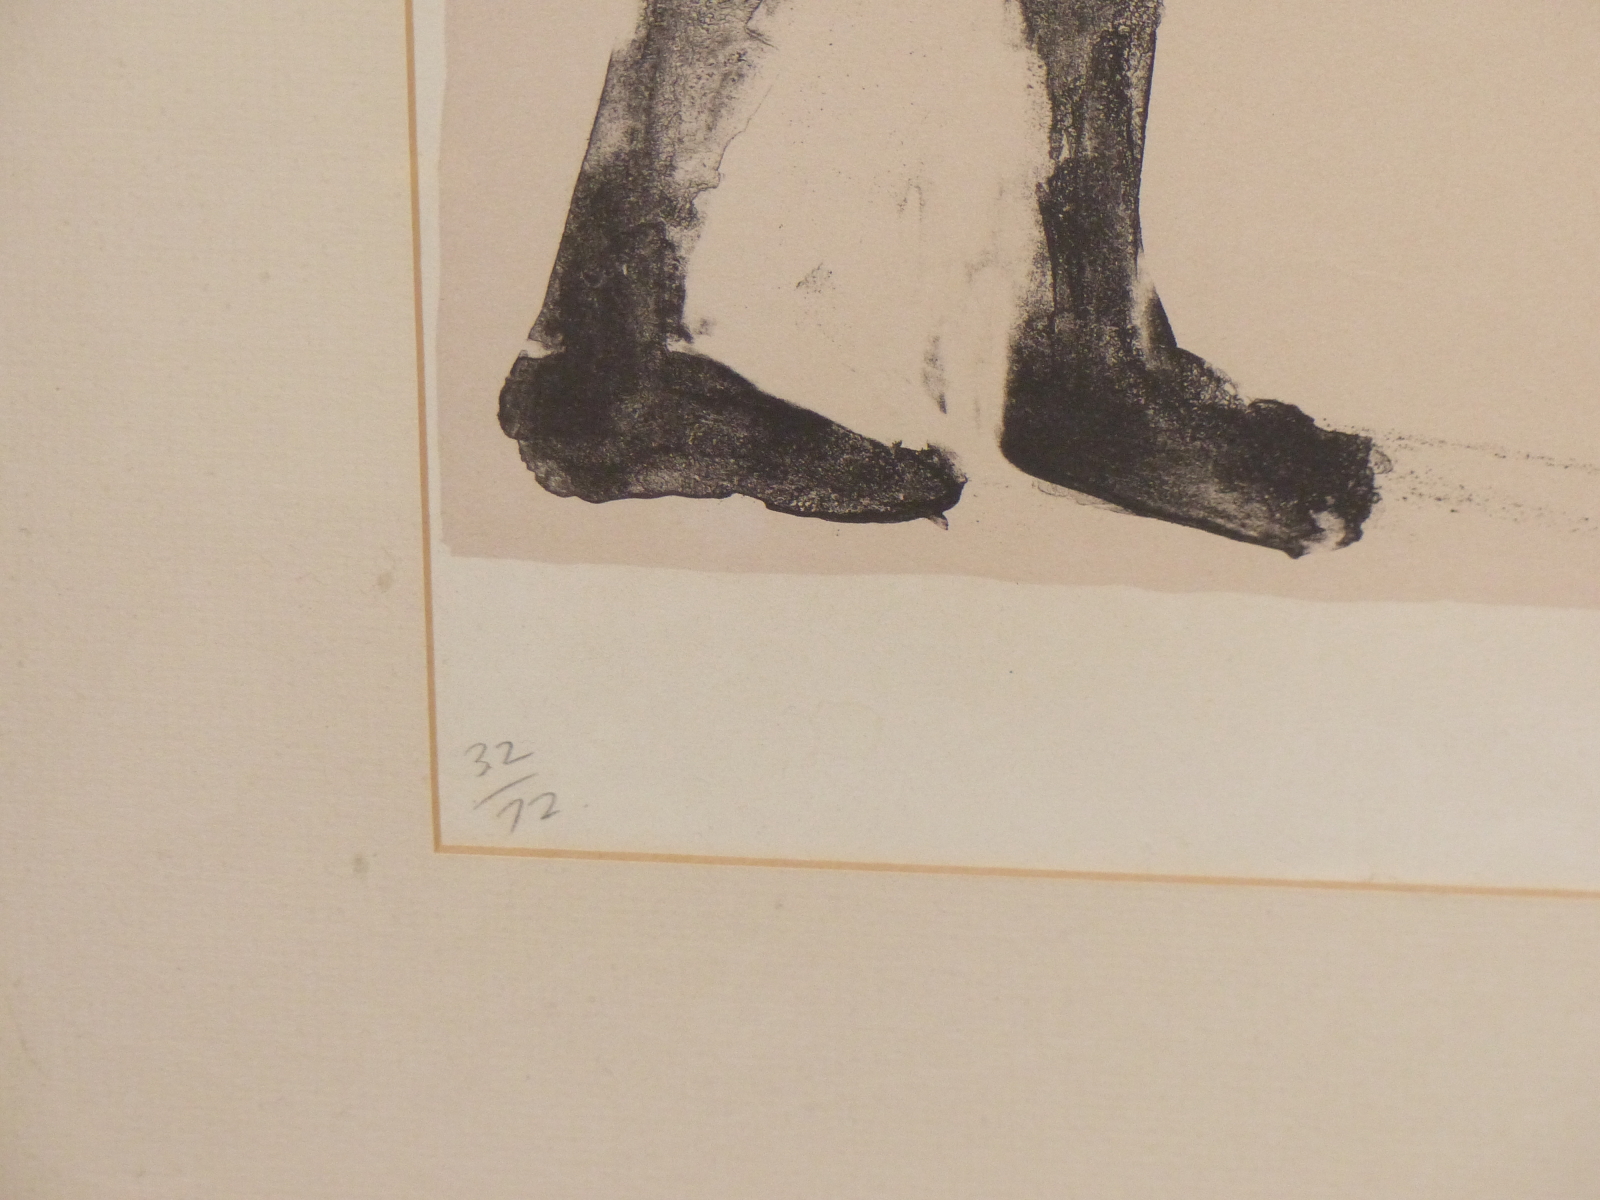 ELISABETH FRINK (1930-1993) ARR, CORRIDA FIVE, 1973, SIGNED IN PENCIL AND NUMBERED 32/72, 77x - Image 4 of 19